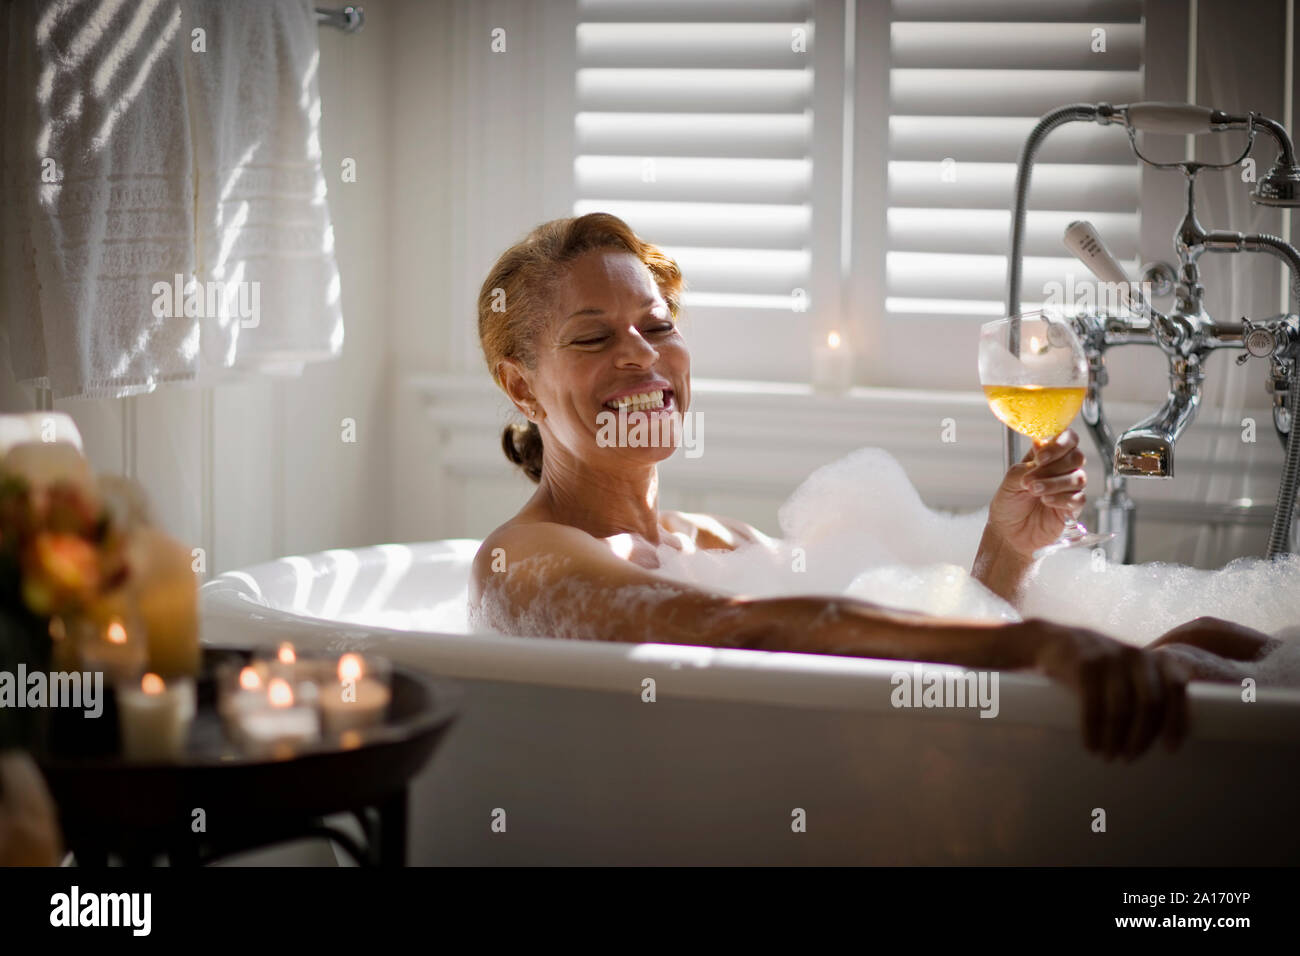 https://c8.alamy.com/comp/2A170YP/mid-adult-woman-relaxing-in-a-bubble-bath-with-a-glass-of-wine-and-surrounded-by-candles-2A170YP.jpg